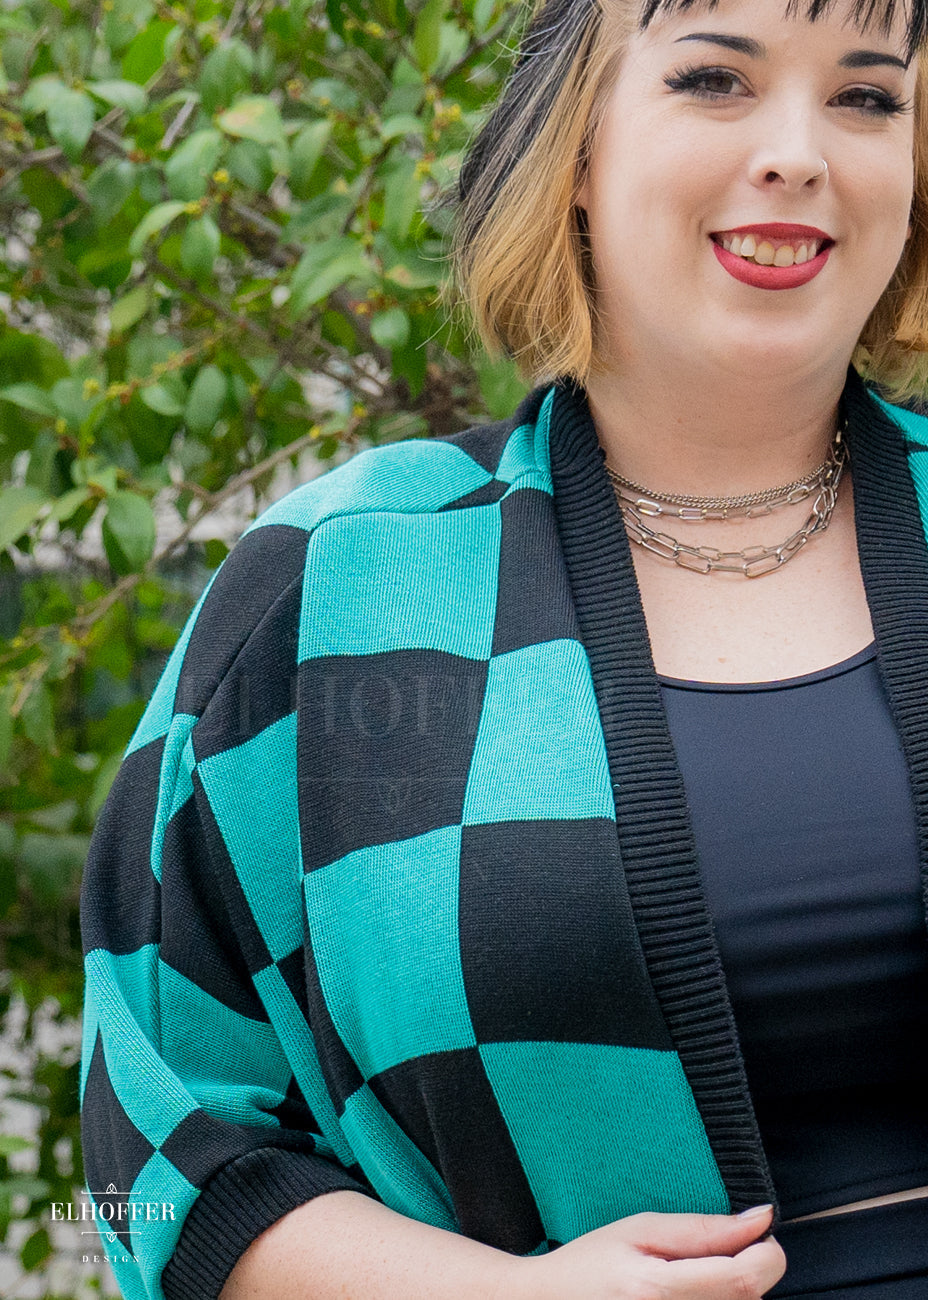 A close up of Katie Lynn, a fair skinned 2xl model with short black and blonde hair with bangs, to showcase the black and green chessboard pattern and black ribbing along front edge and cuffs.